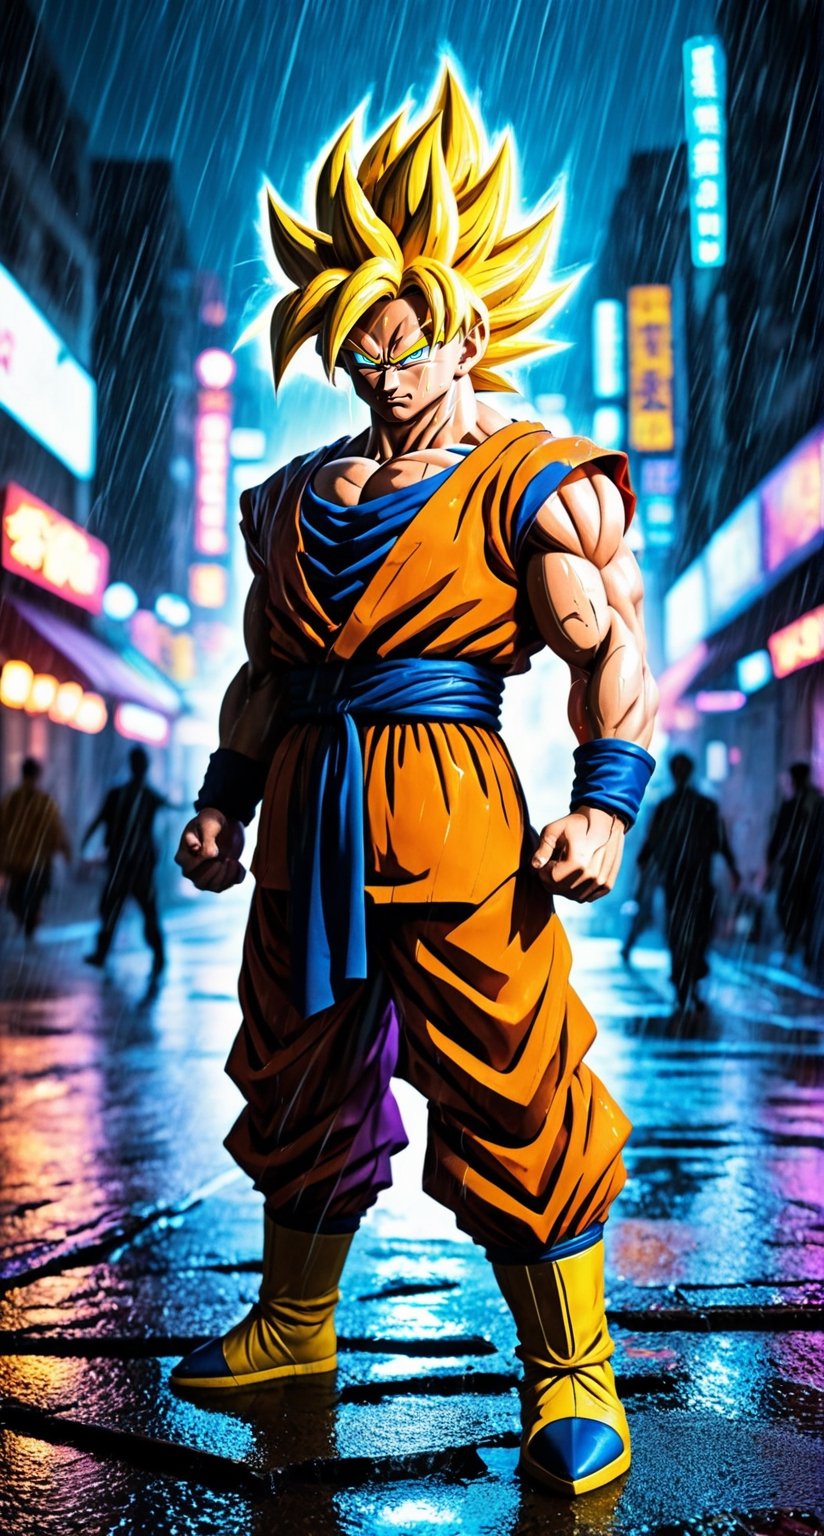 Masterpiece in UHD resolution, action anime style with a focus on lighting and movement effects, inspired by the works of Akira Toriyama and Toyotaro. | Goku transformed into Super Saiyan 3, with long hair and a fiery golden aura, is in the middle of a city at night during a heavy rain. His eyes are filled with fury and determination, while his body radiates incredibly powerful ki. | The city is lit by neon lights in blue and purple, creating reflections on the damp buildings and puddles of water in the street. The camera angle is slightly tilted, enhancing the dramatic intensity of the scene. | The composition of the image follows the rule of thirds, with Goku positioned at the point of intersection of the lines. | Dramatic lighting effects and dynamic ki movement create a stunning contrast between the heavy rain and Goku's fiery energy. | Goku in his Super Saiyan 3 form, furious and radiating ki in the middle of a city at night during heavy rain. | ((perfect_composition, perfect_design, perfect_layout, perfect_detail, ultra_detailed, enhance_details, correct_imperfections)), ((More Detail, Enhance)),